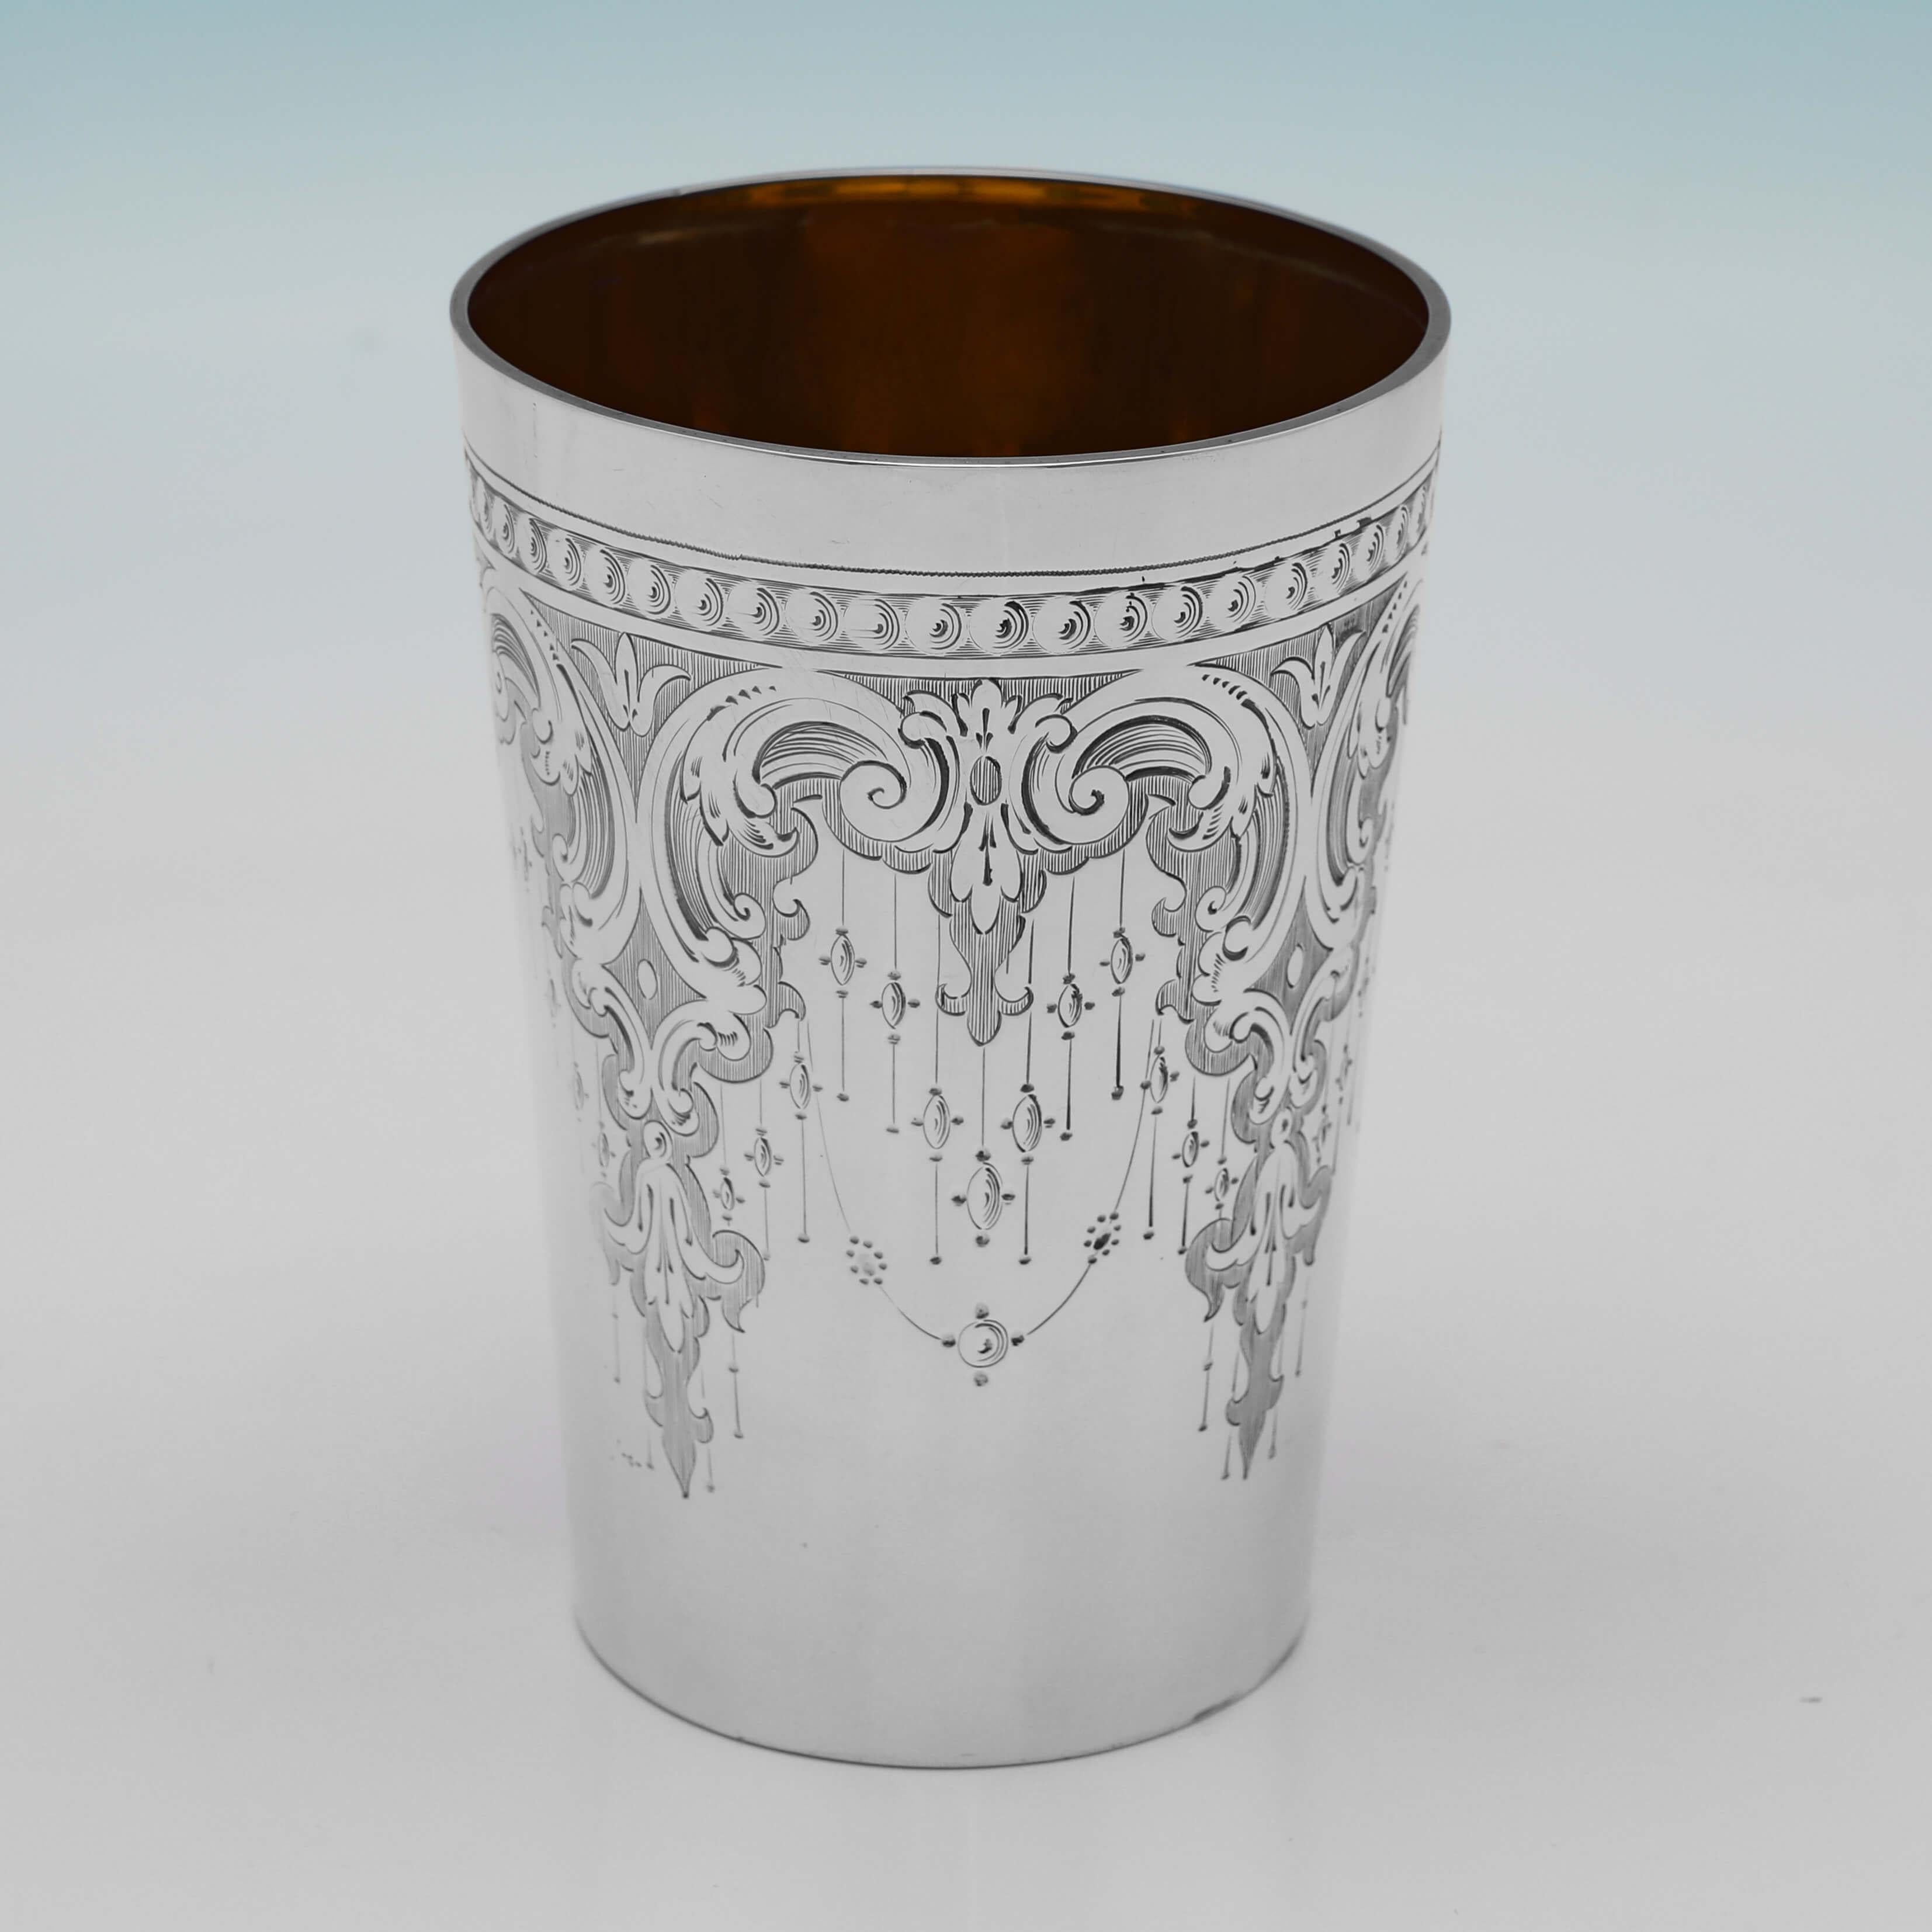 Hallmarked in London in 1872 by Henry John Lias & Son, this very attractive, Victorian, Antique Sterling Silver Beaker, features wonderfully engraved decoration throughout and a gilt interior. The beaker measures 4.5